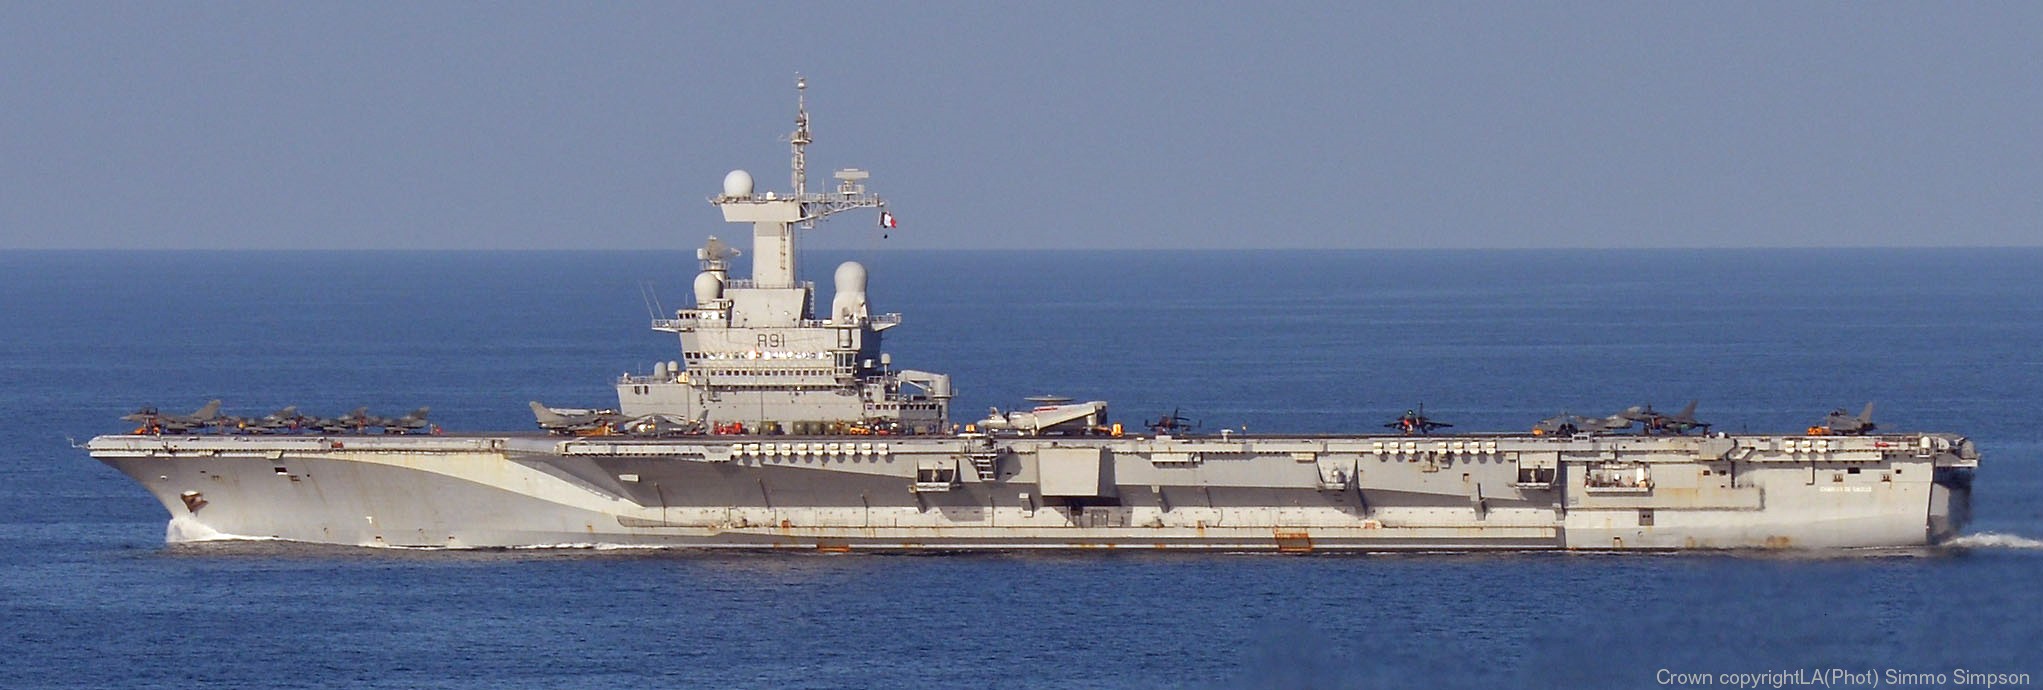  r-91 fs charles de gaulle aircraft carrier french navy 20